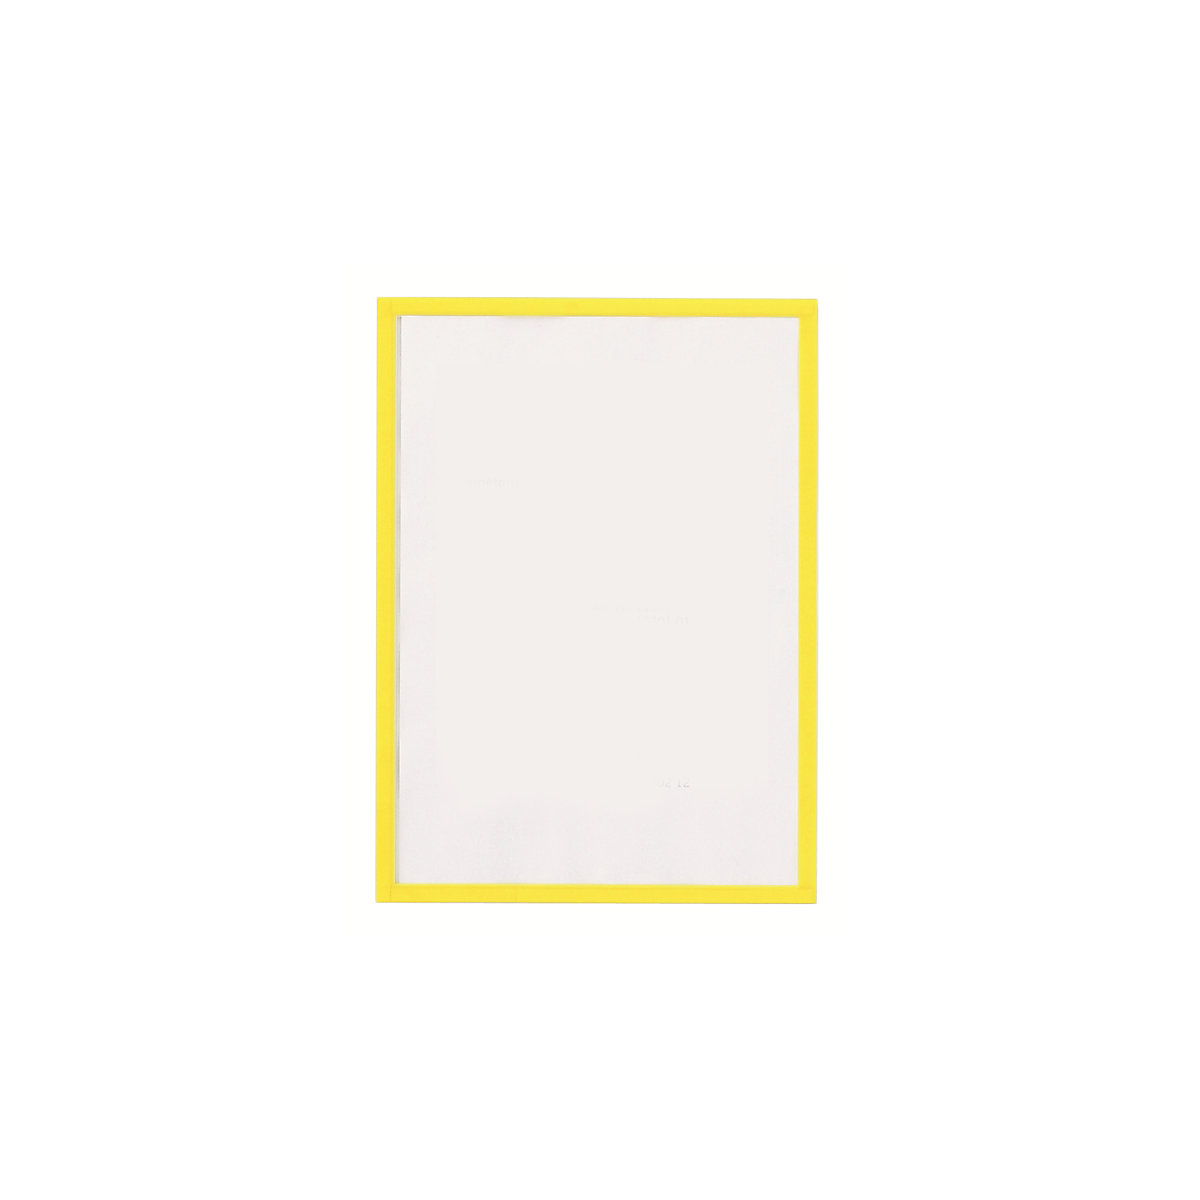 magnetofix vision panel – magnetoplan, format A4, pack of 5, yellow frame-9